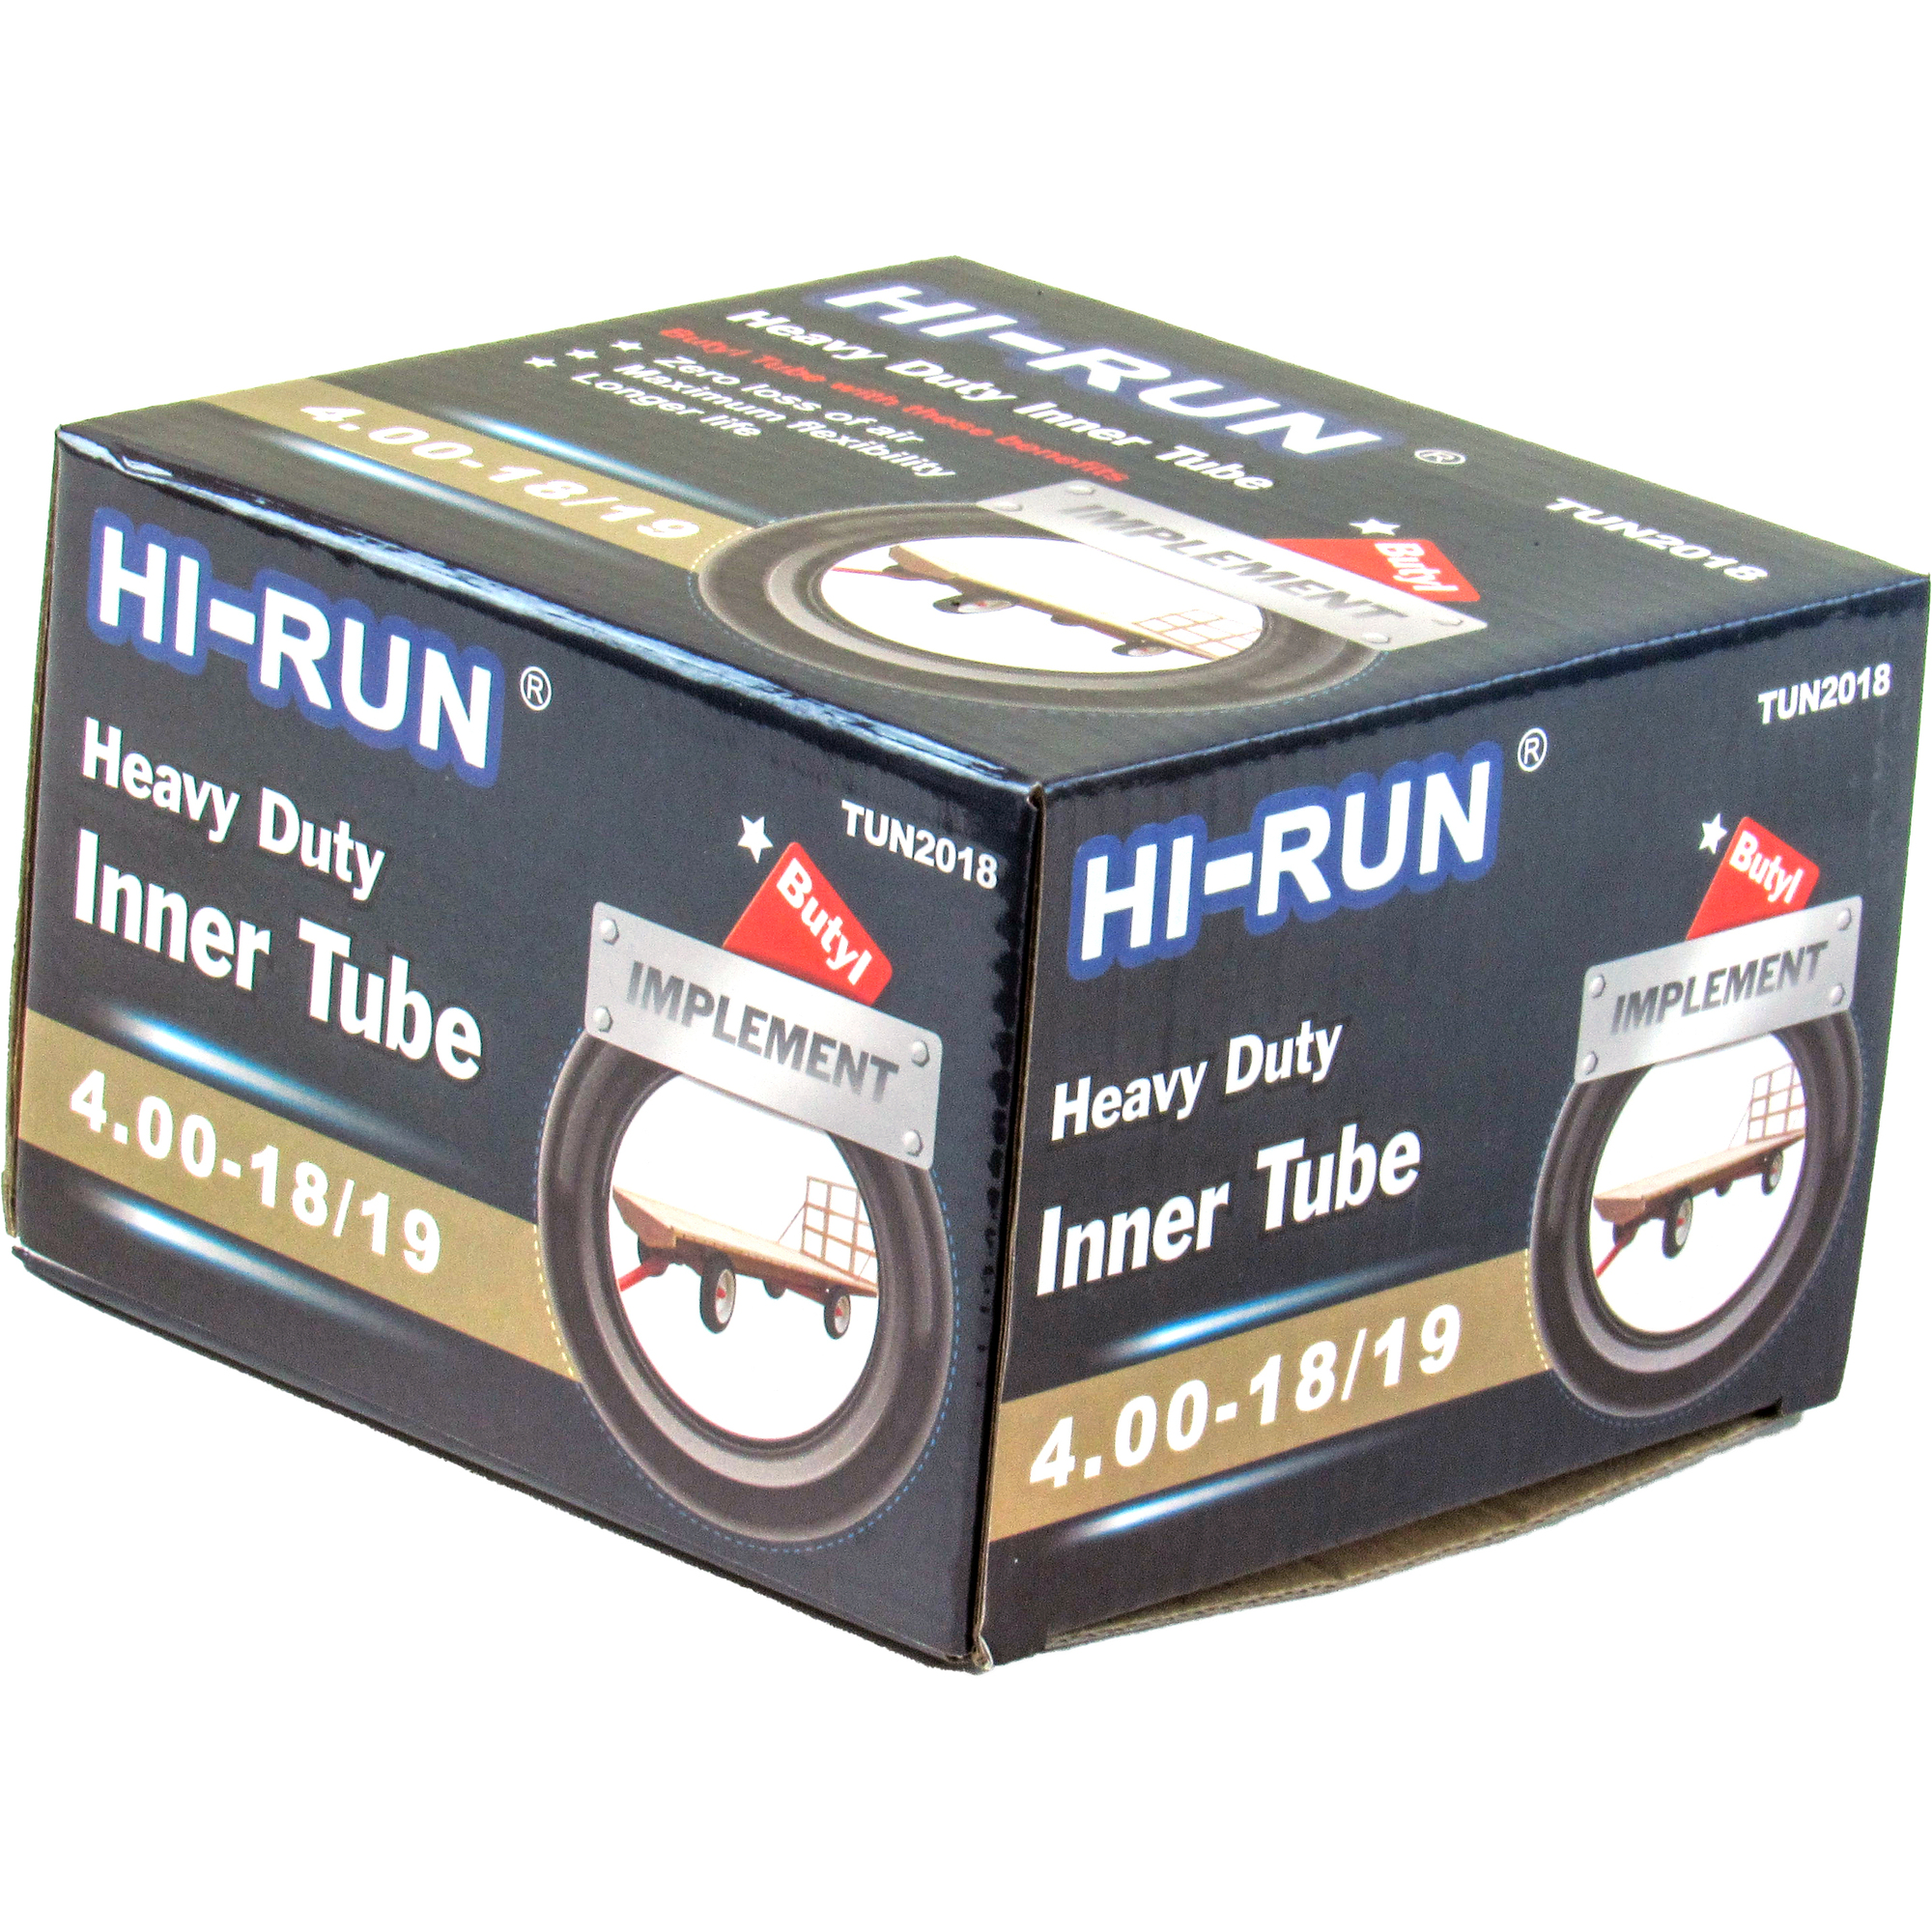 HI-RUN, Tube 4.00-18/19 (TR15) Float Implement, Fits Rim Size 18 in, Included (qty.) 1 Model TUN2018